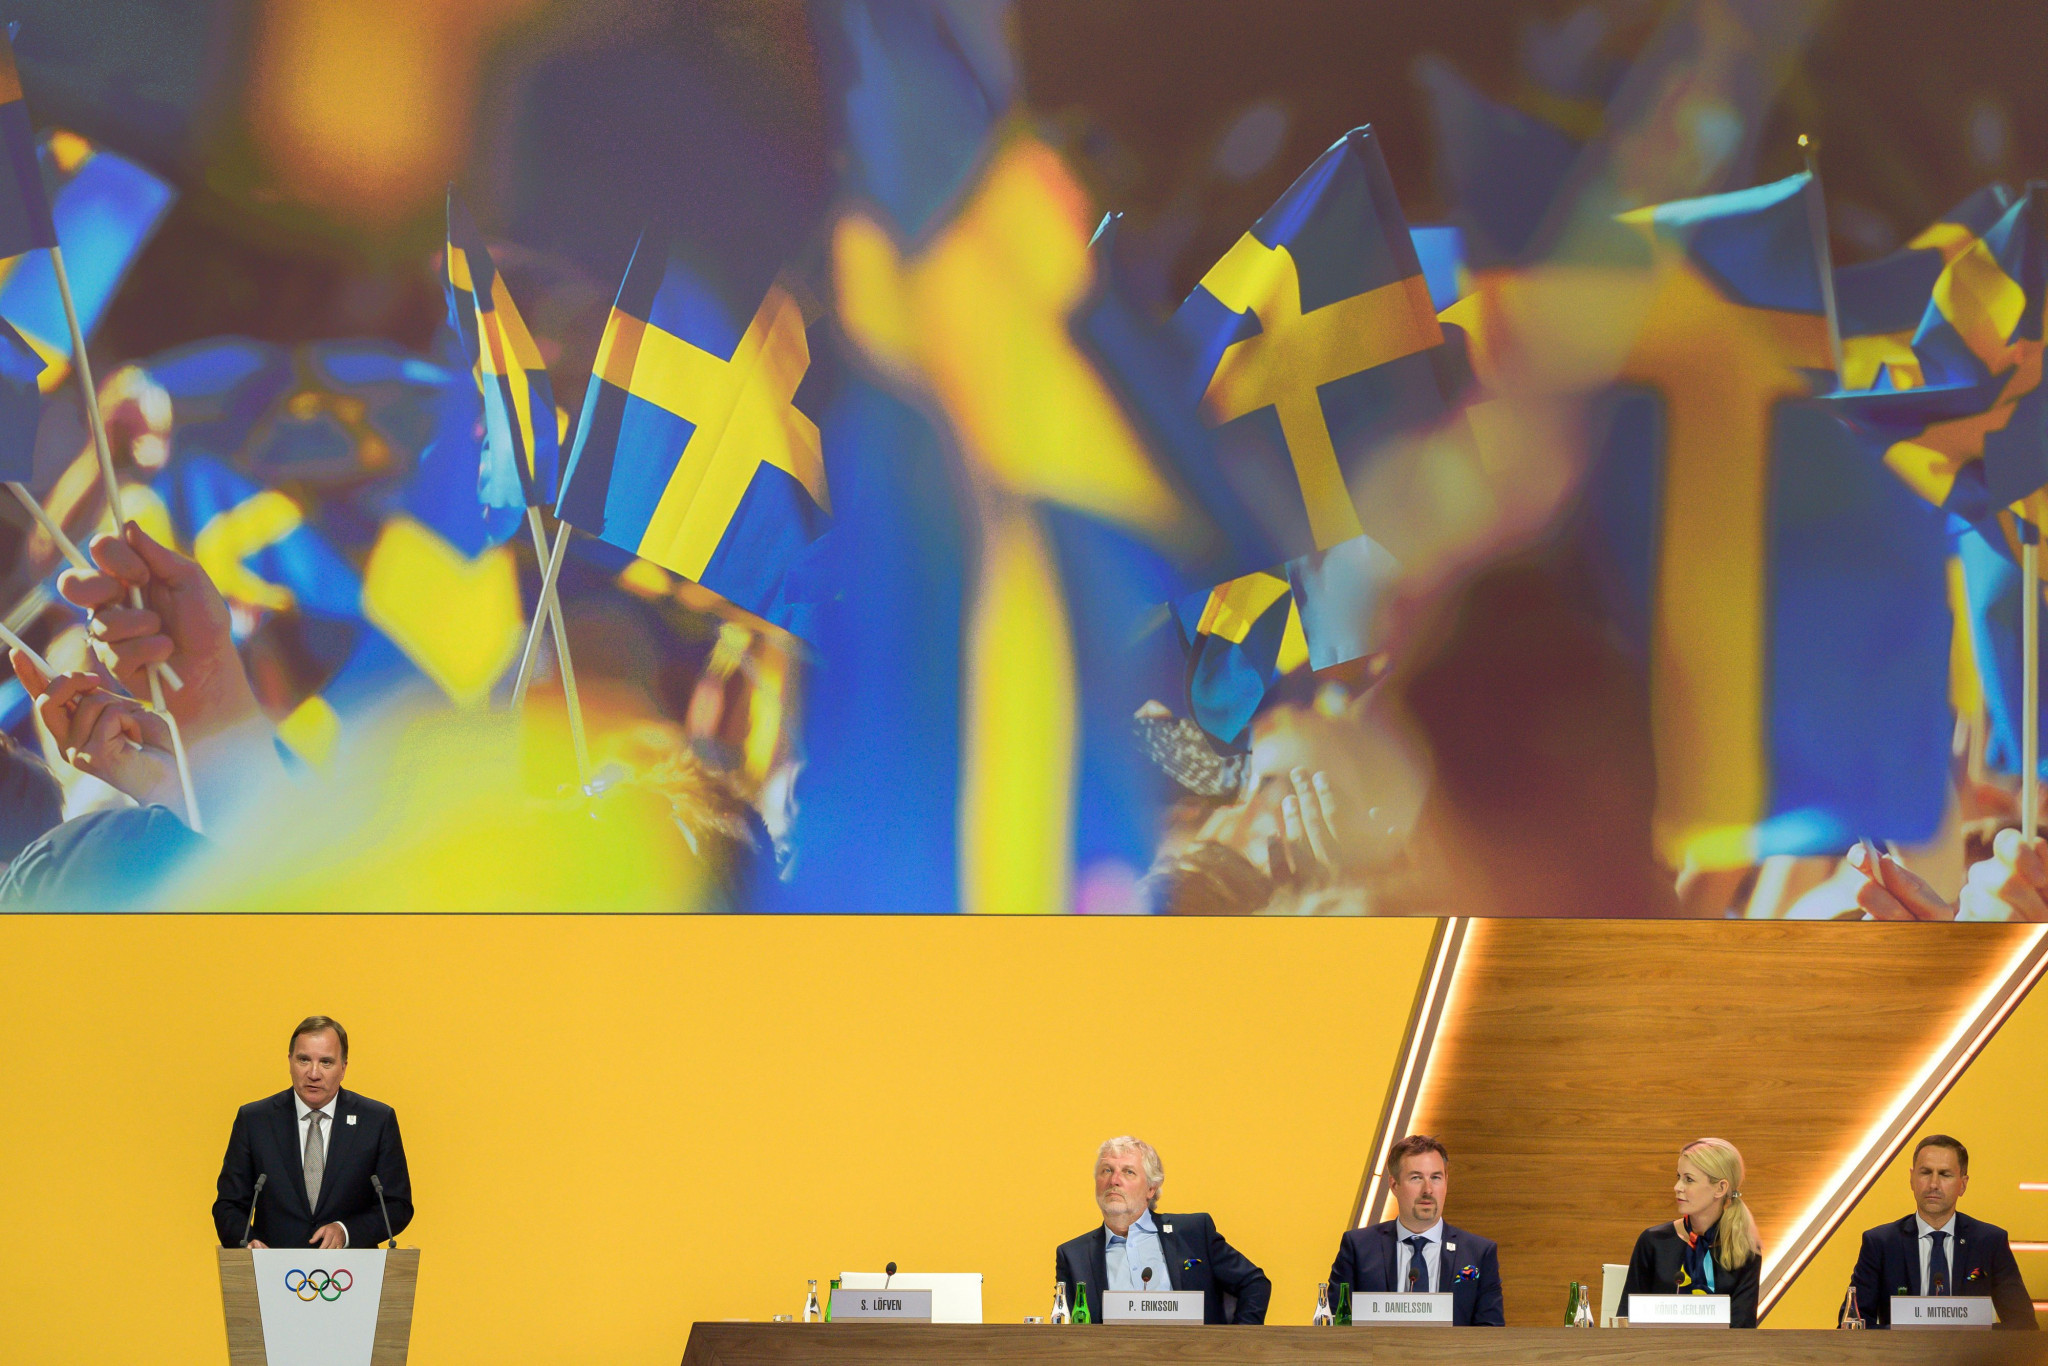 Sweden has rekindled its interest in hosting the Winter Olympics and Paralympics despite Stockholm-Åre losing out in the 2026 bidding process ©Getty Images